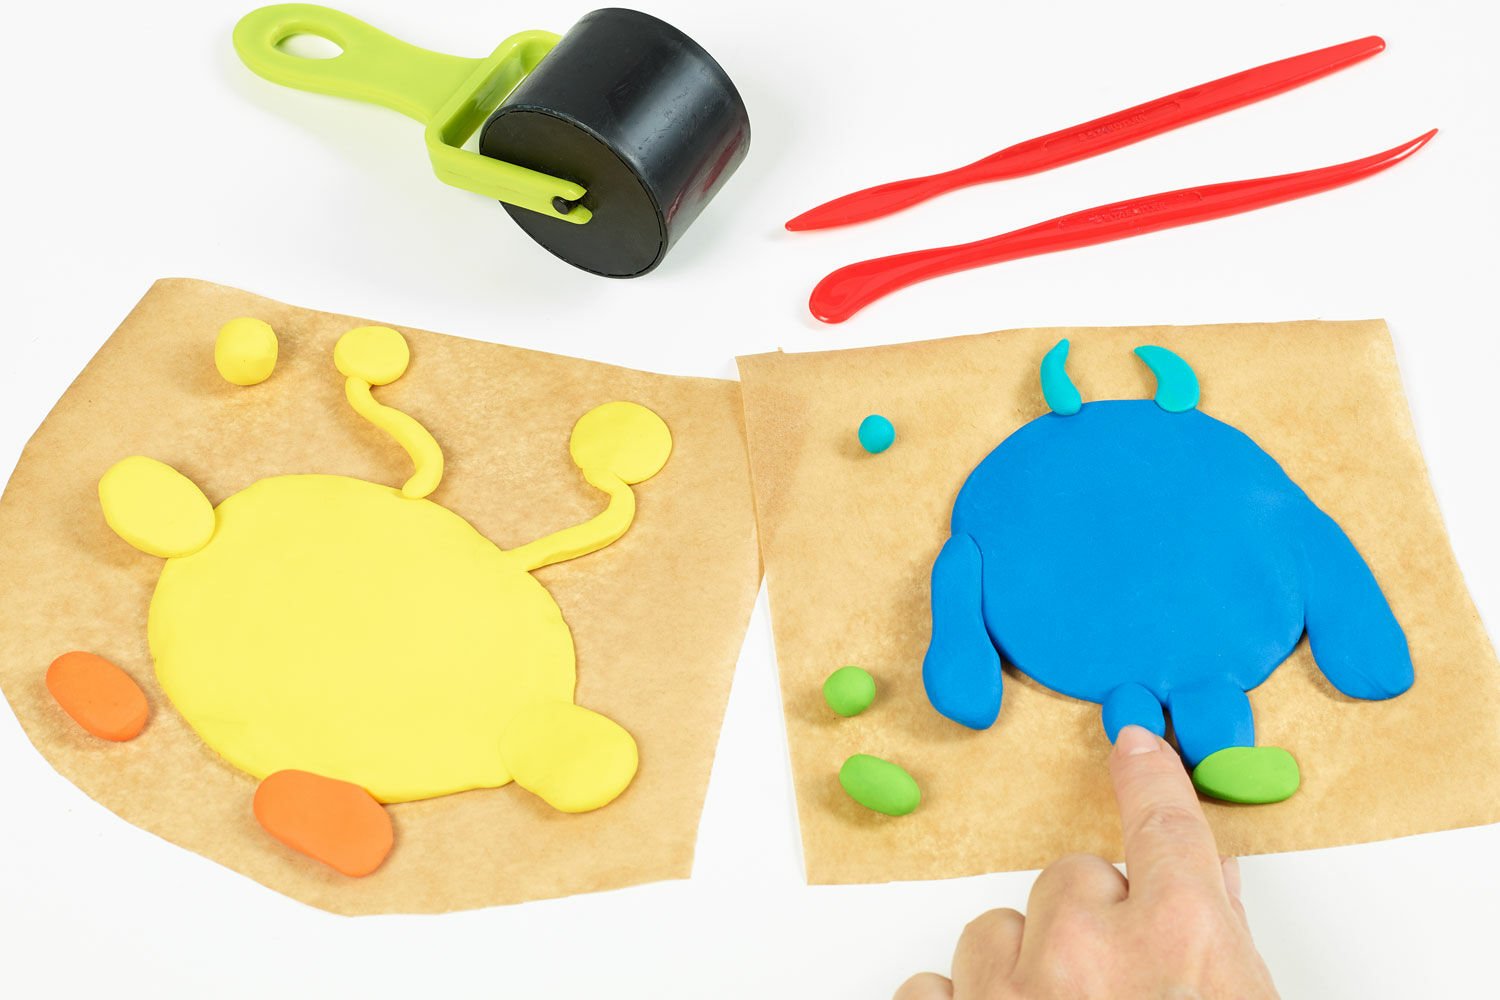 Art and craft materials for children aged 2 and up